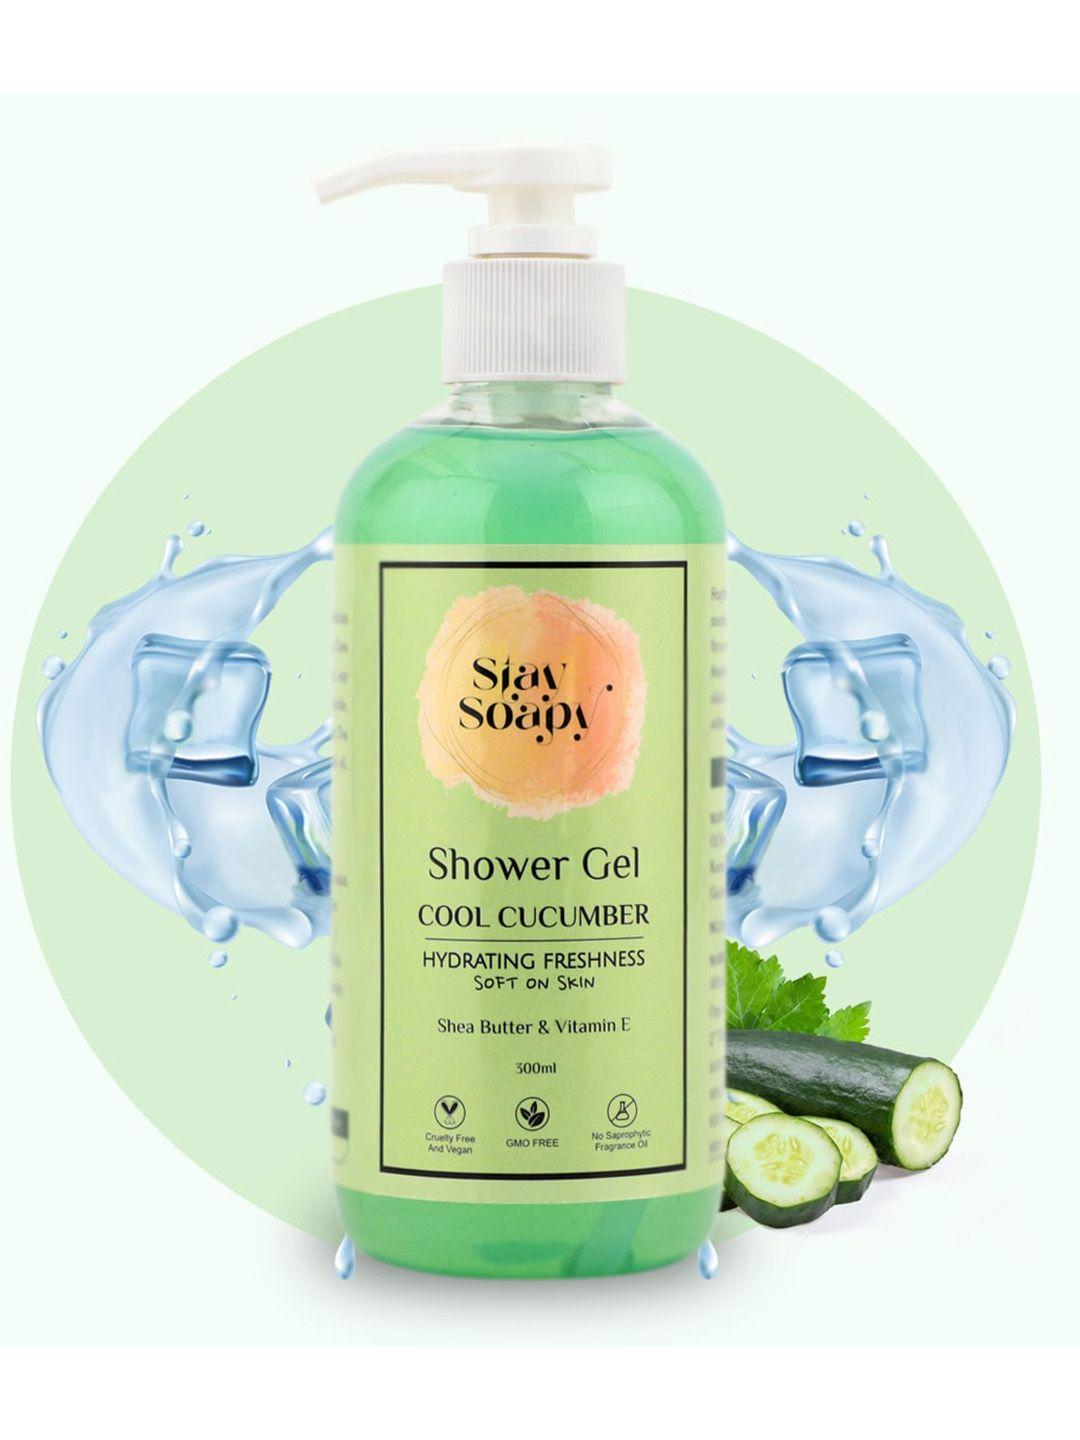 stay soapy hydrating freshness cool cucumber shower gel with shea butter - 300 ml